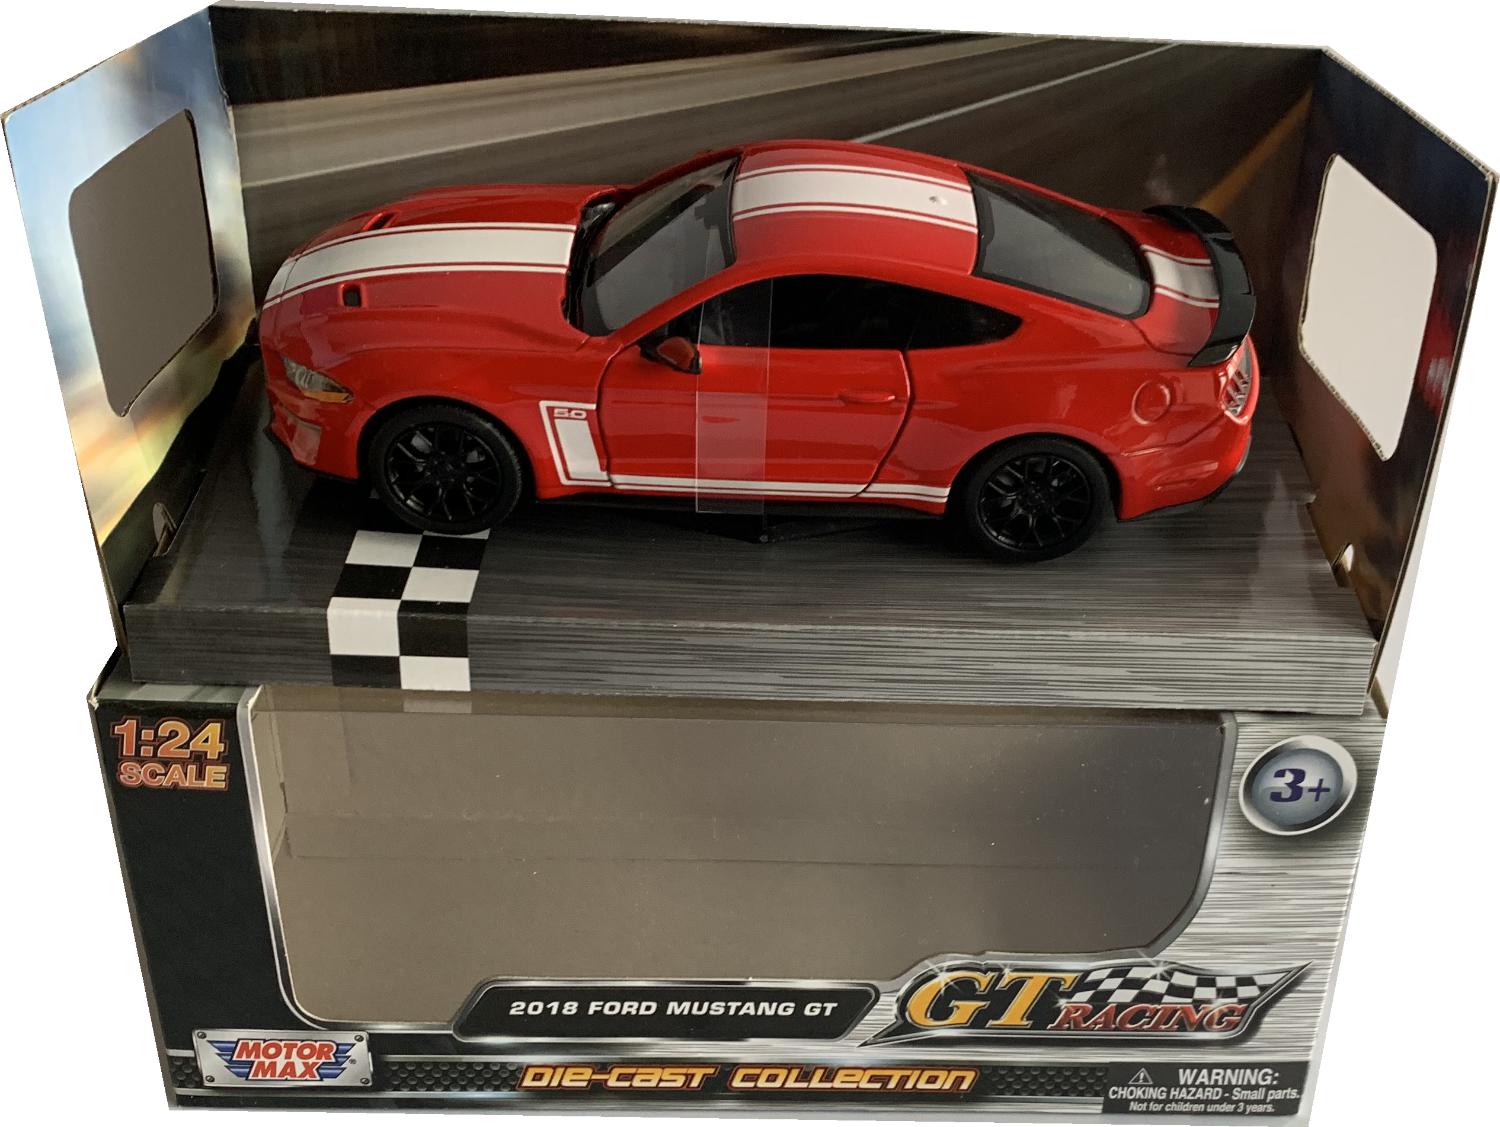 An excellent reproduction of the Ford Mustang GT with high level of detail throughout, all authentically recreated. The model is presented in a window display box, the car is approx. 19.5 cm long and the presentation box is 24.5 cm long